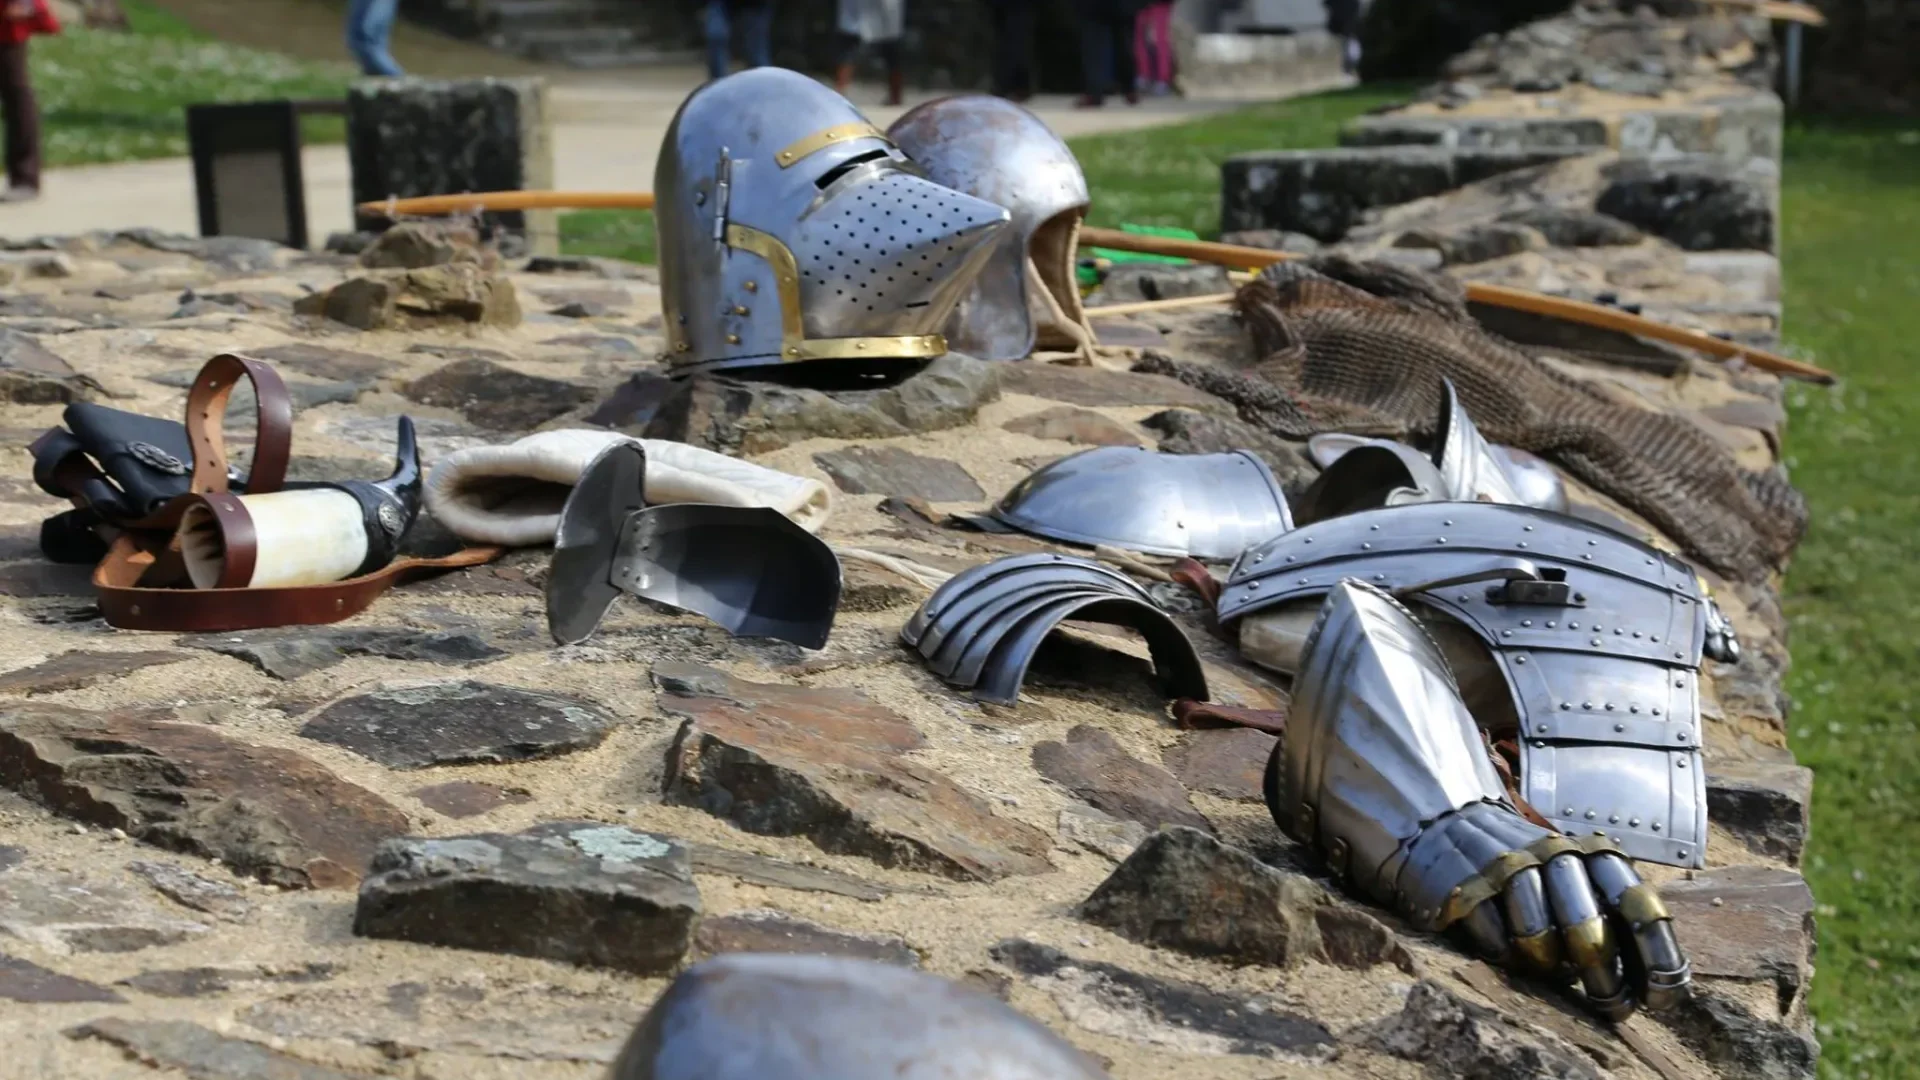 Knight's armor displayed on a low wall